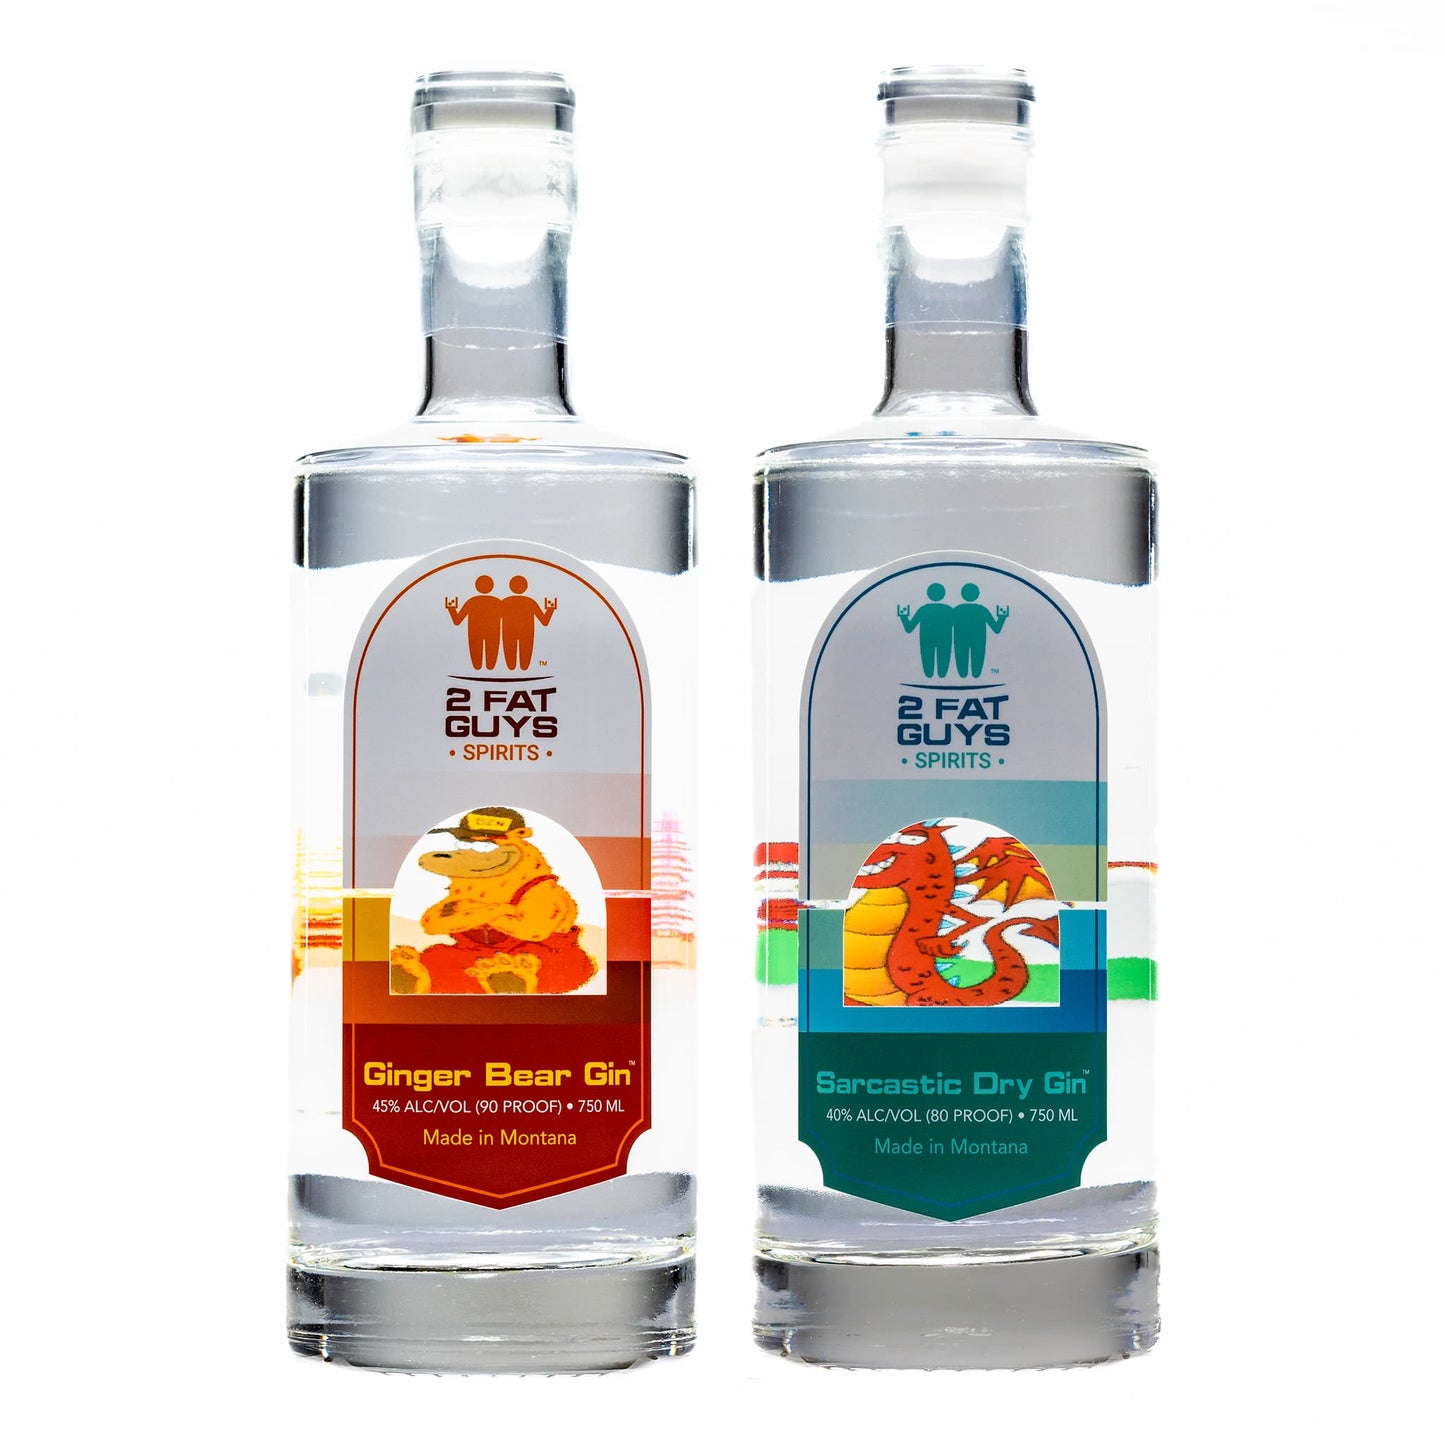 2 Fat Guys Ginger Bear Gin & Sarcastic Dry Gin 2-Pack